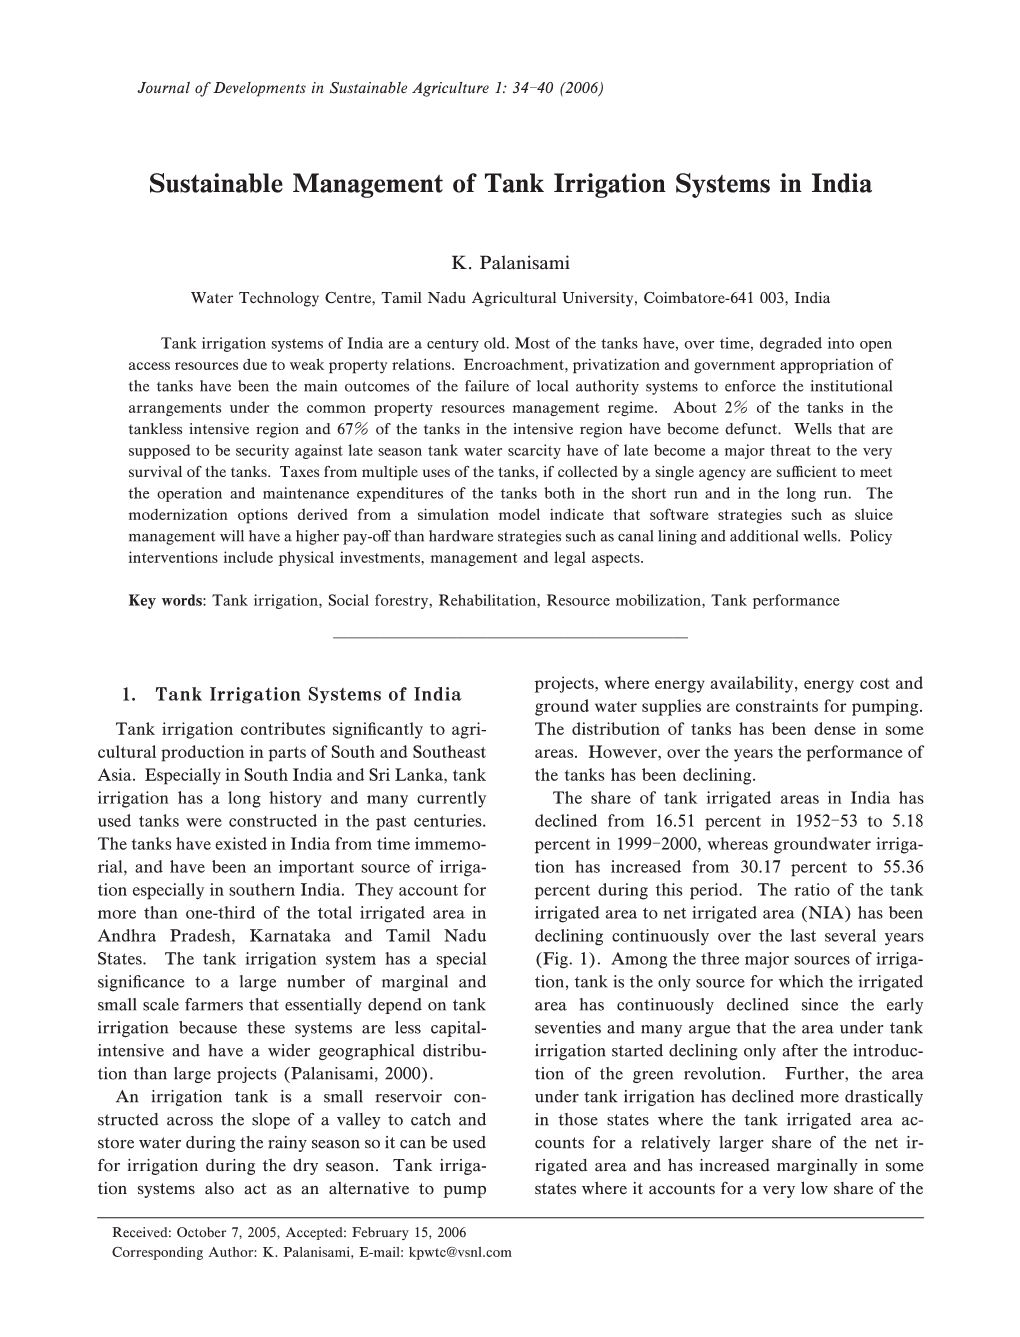 Sustainable Management of Tank Irrigation Systems in India